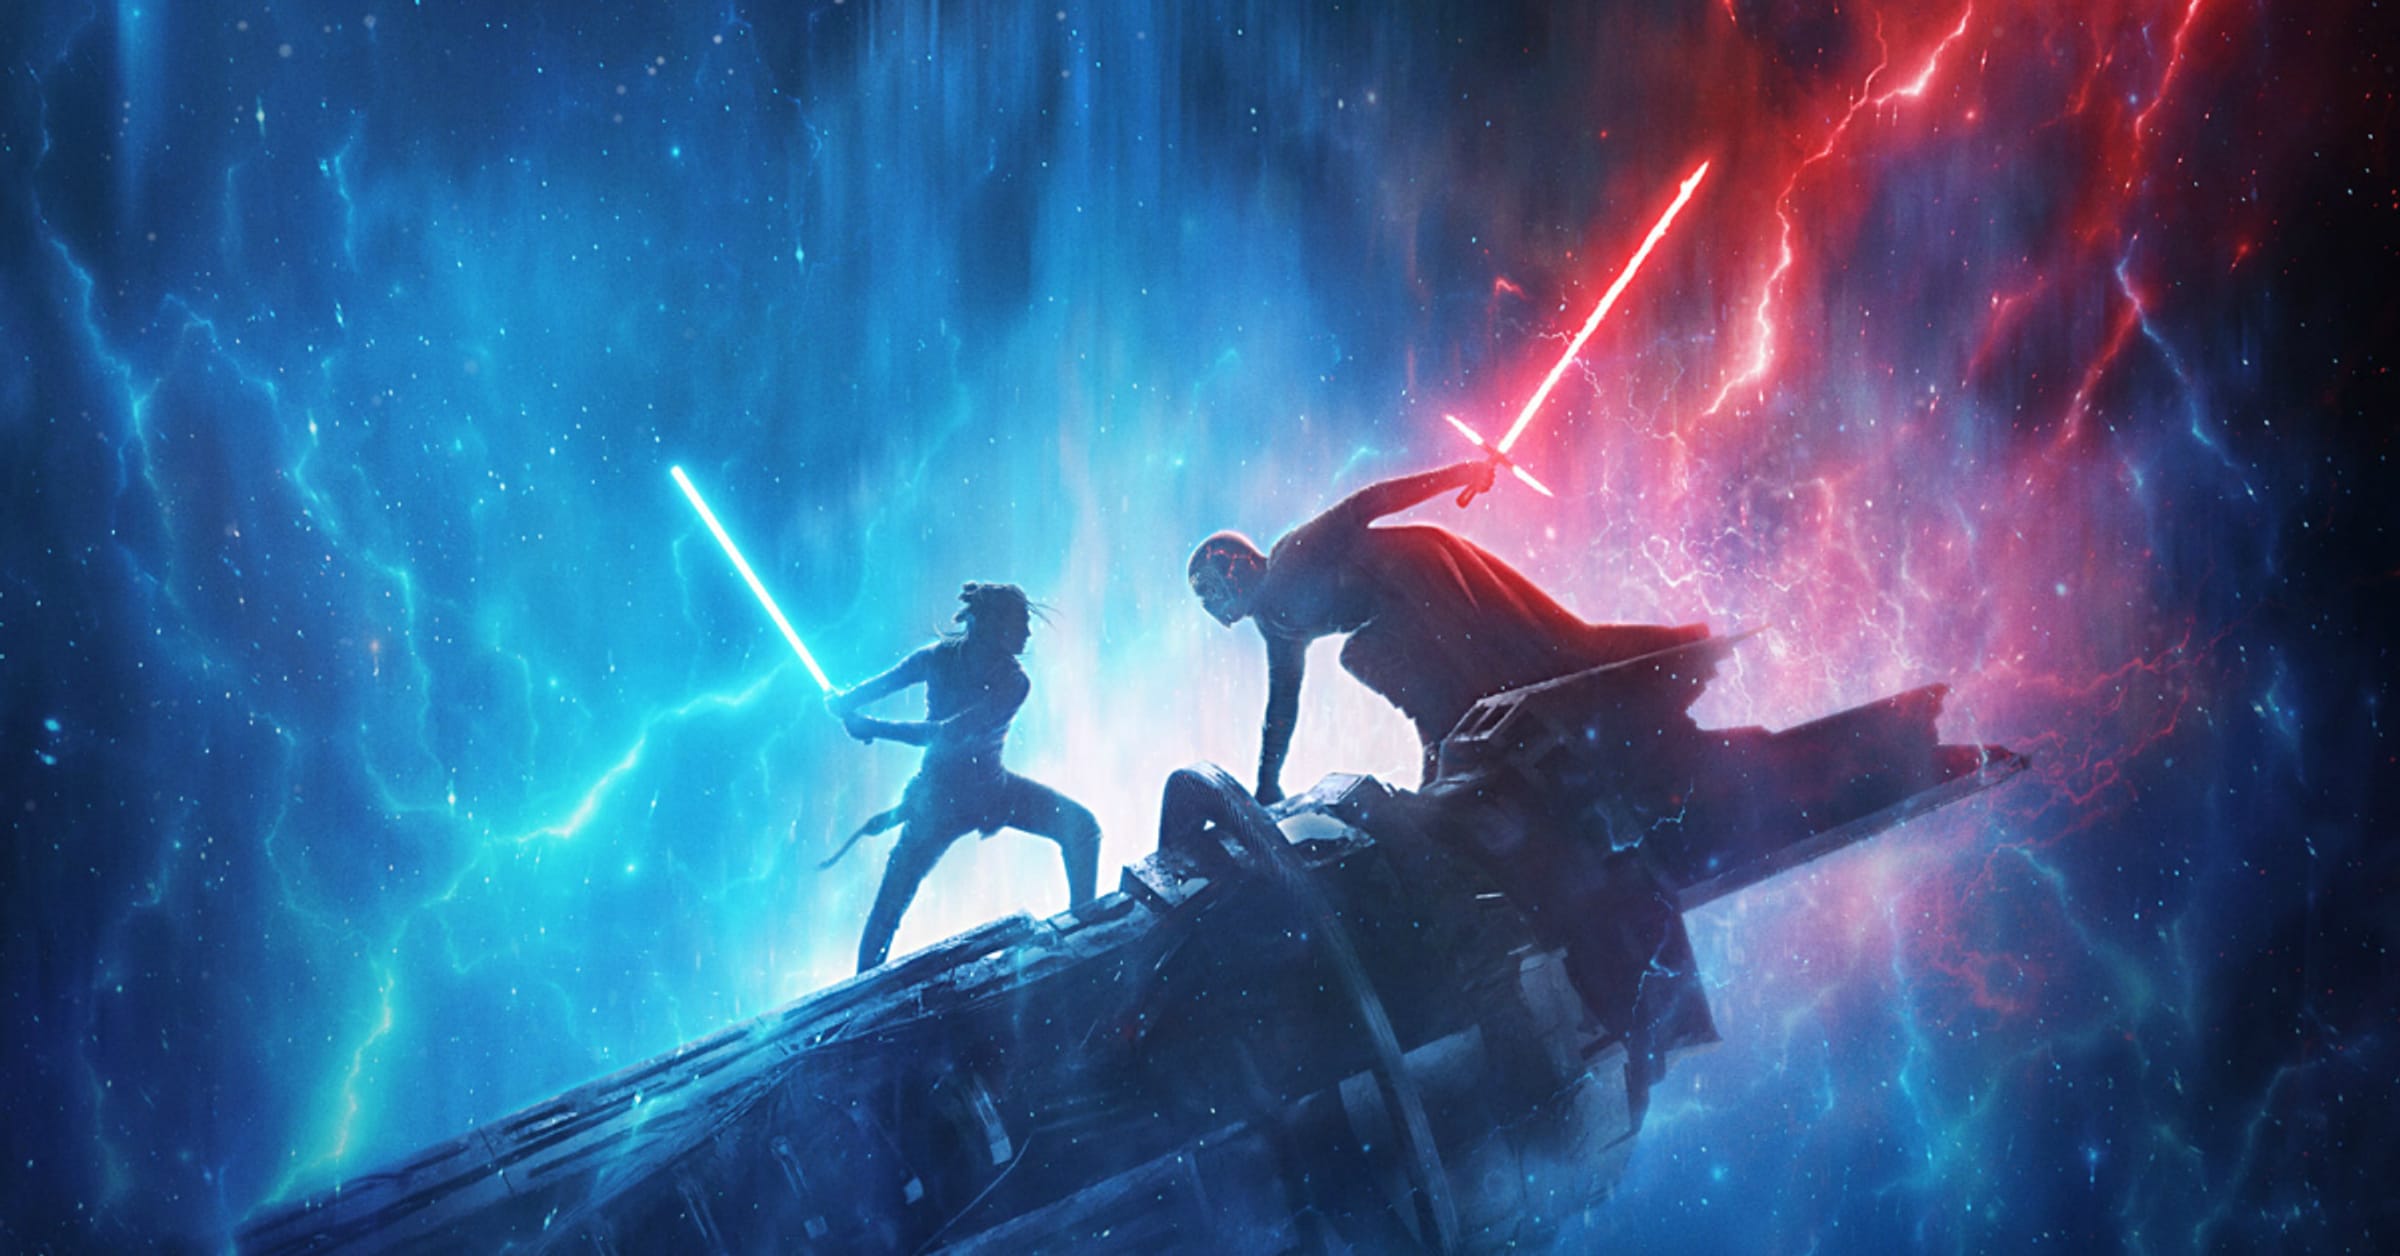 Is Star Wars' 'The Last Jedi' science fiction? It's time to settle